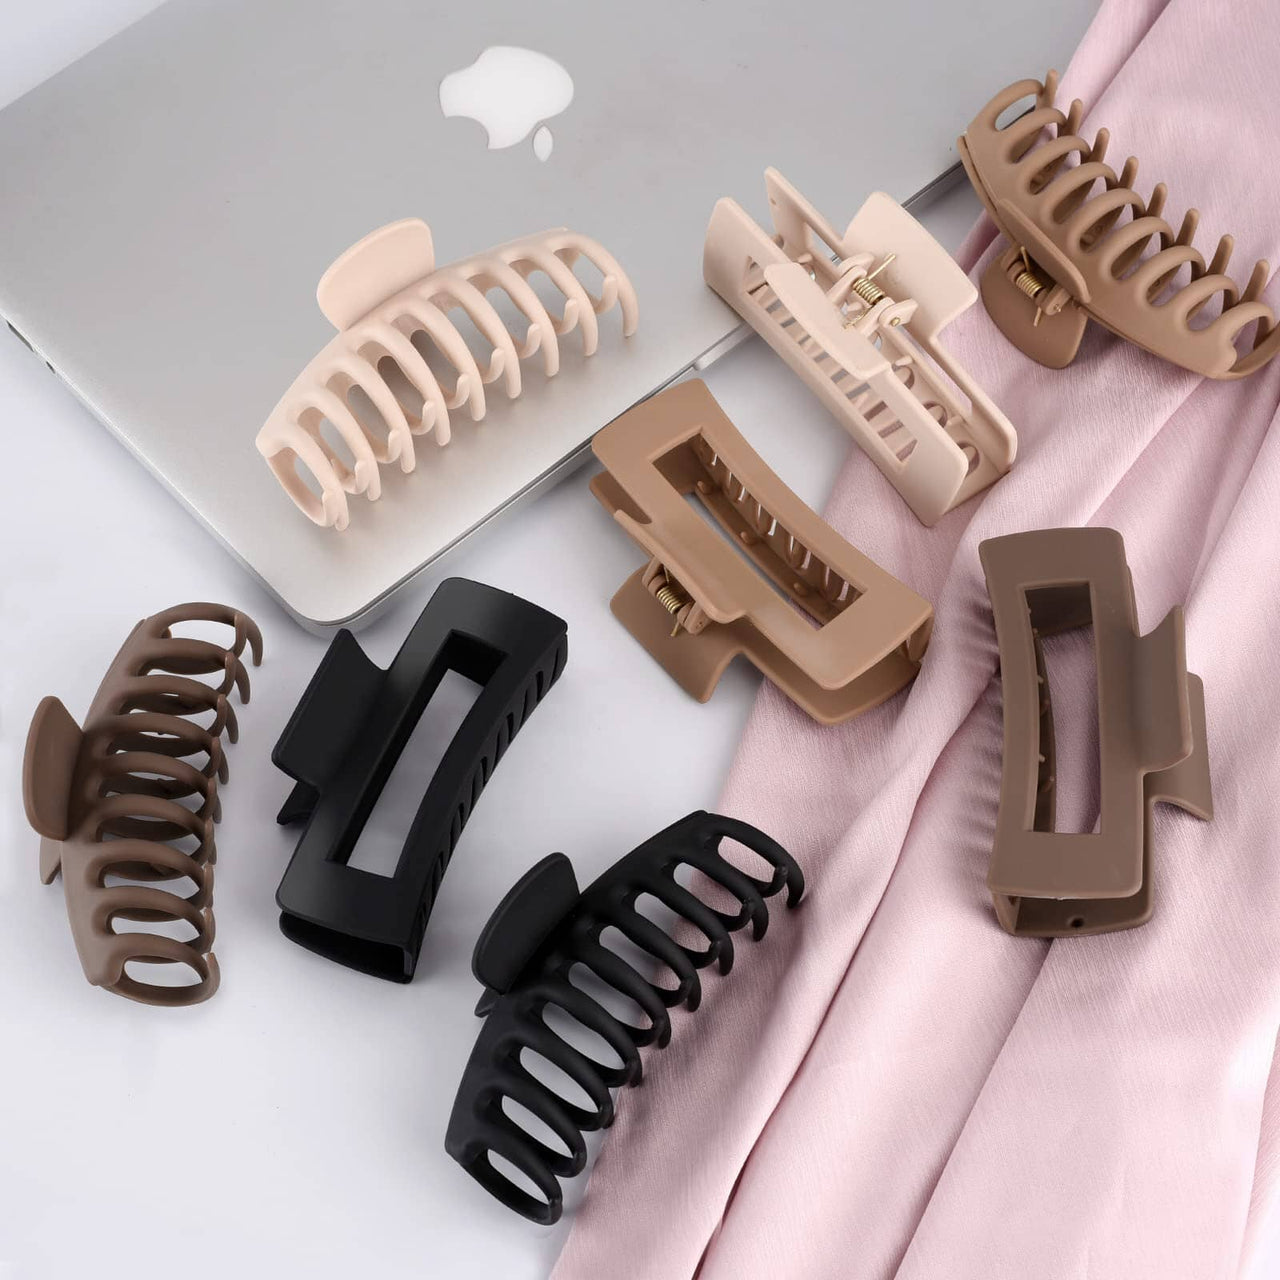 LuSeren LuSeren Hair Clips for Women 4.3 Inch Large Hair Claw Clips for Women Thin Thick Curly Hair, Big Matte Banana Clips,Strong Hold jaw clips,Neutral Colors